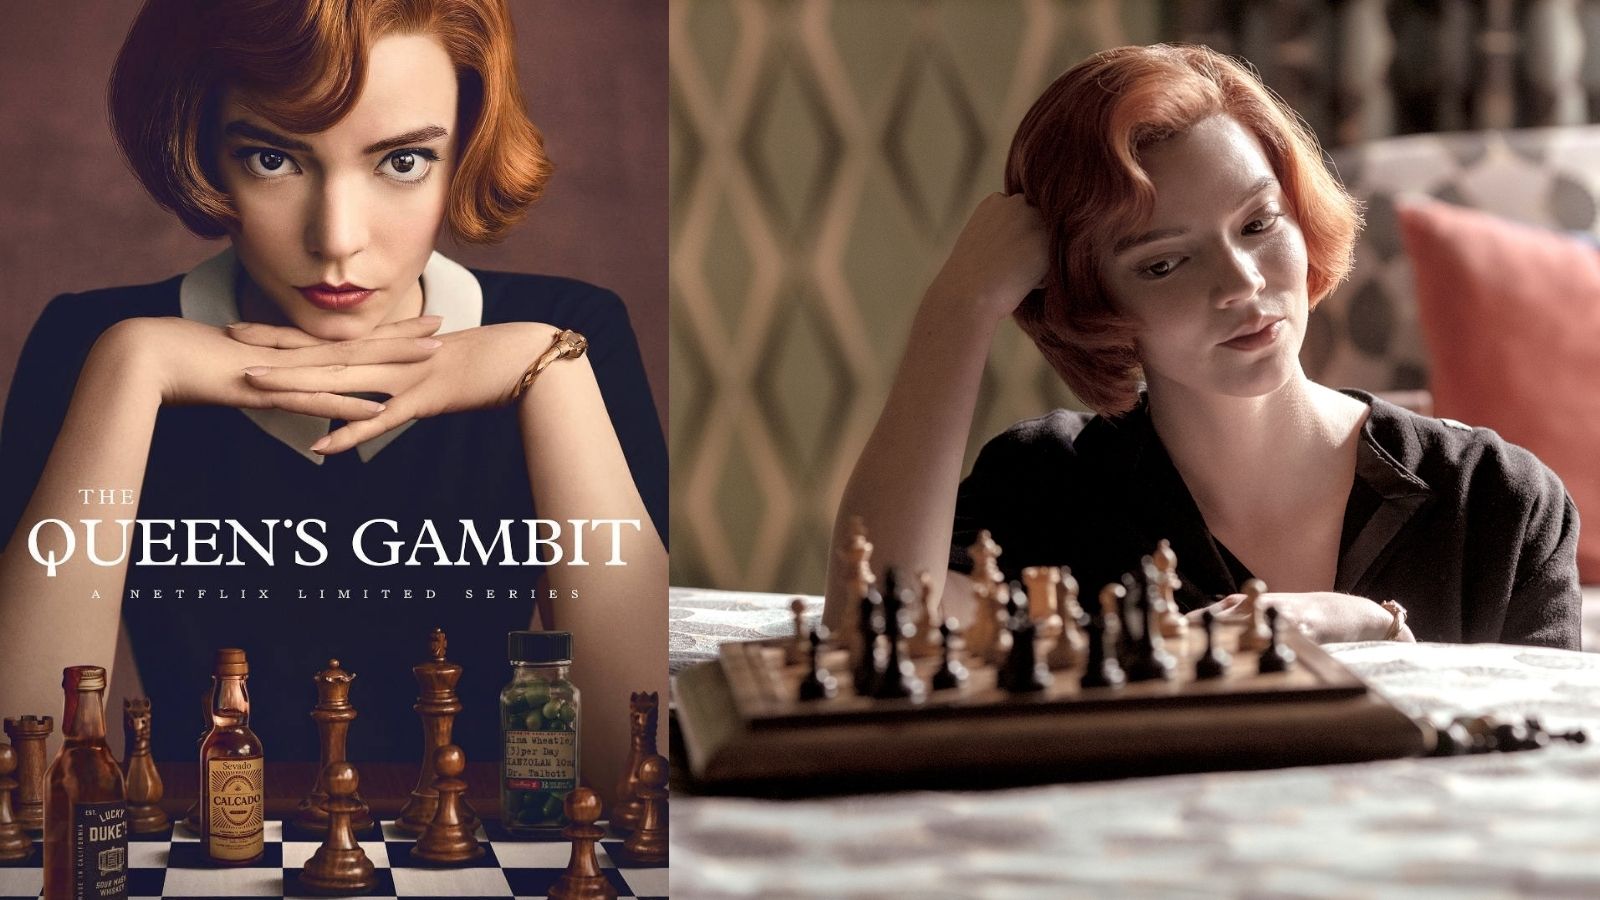 The Queen's Gambit' Is the Grand Master of the Limited Series